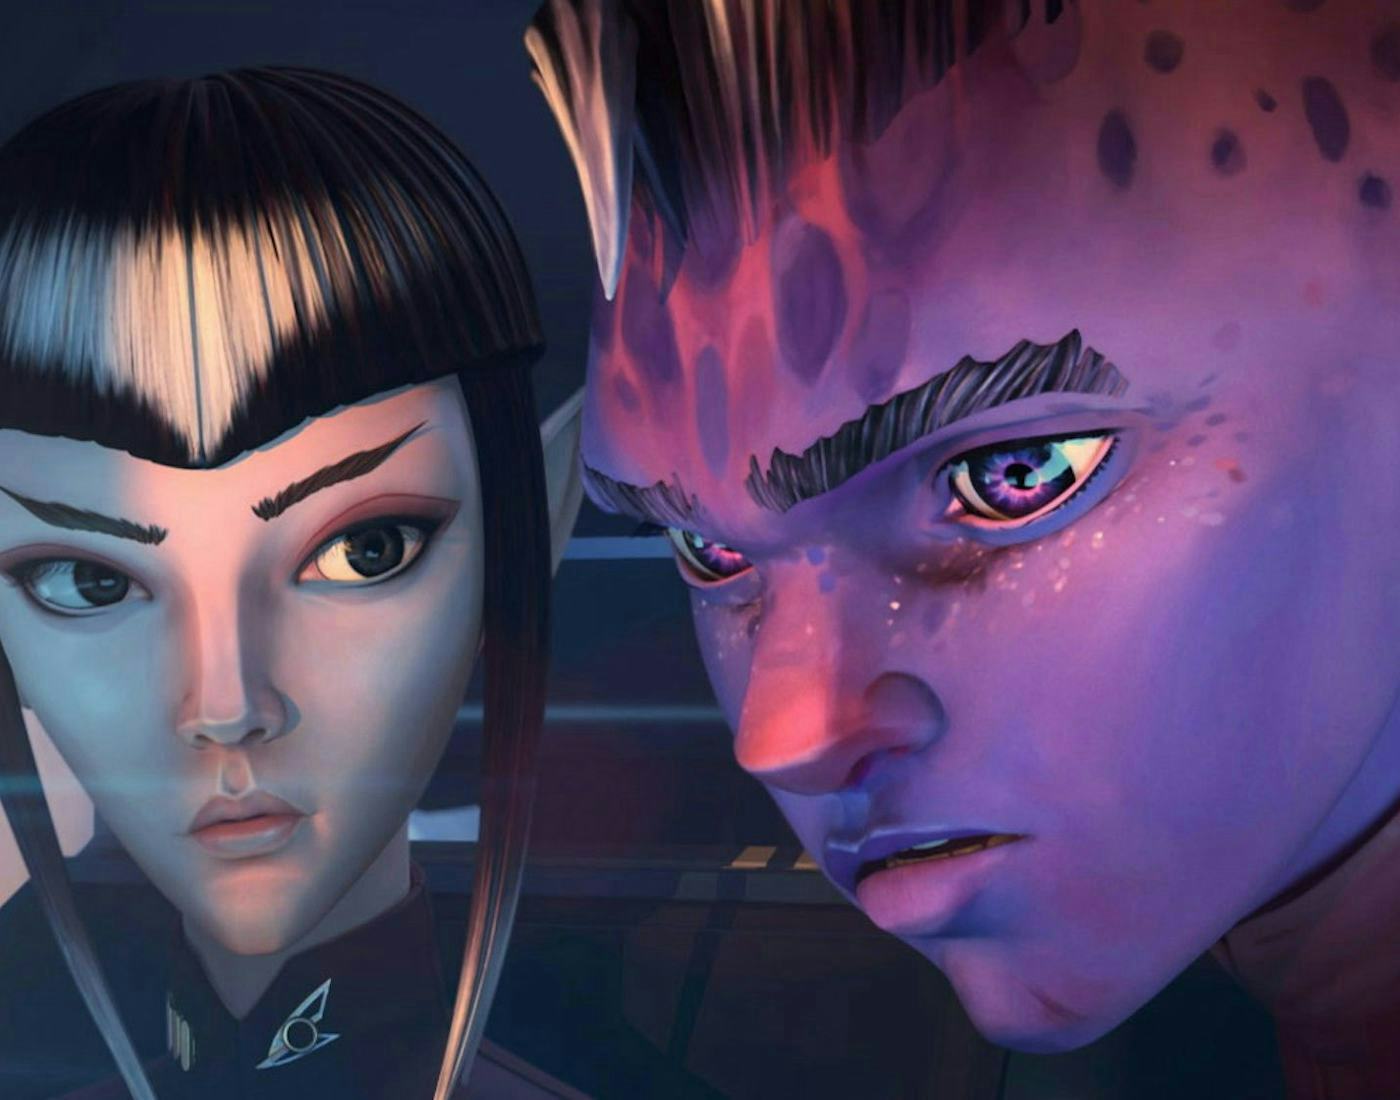 Close-up of two animated characters; a female with black hair and a male with purple skin and spikes, looking intense.